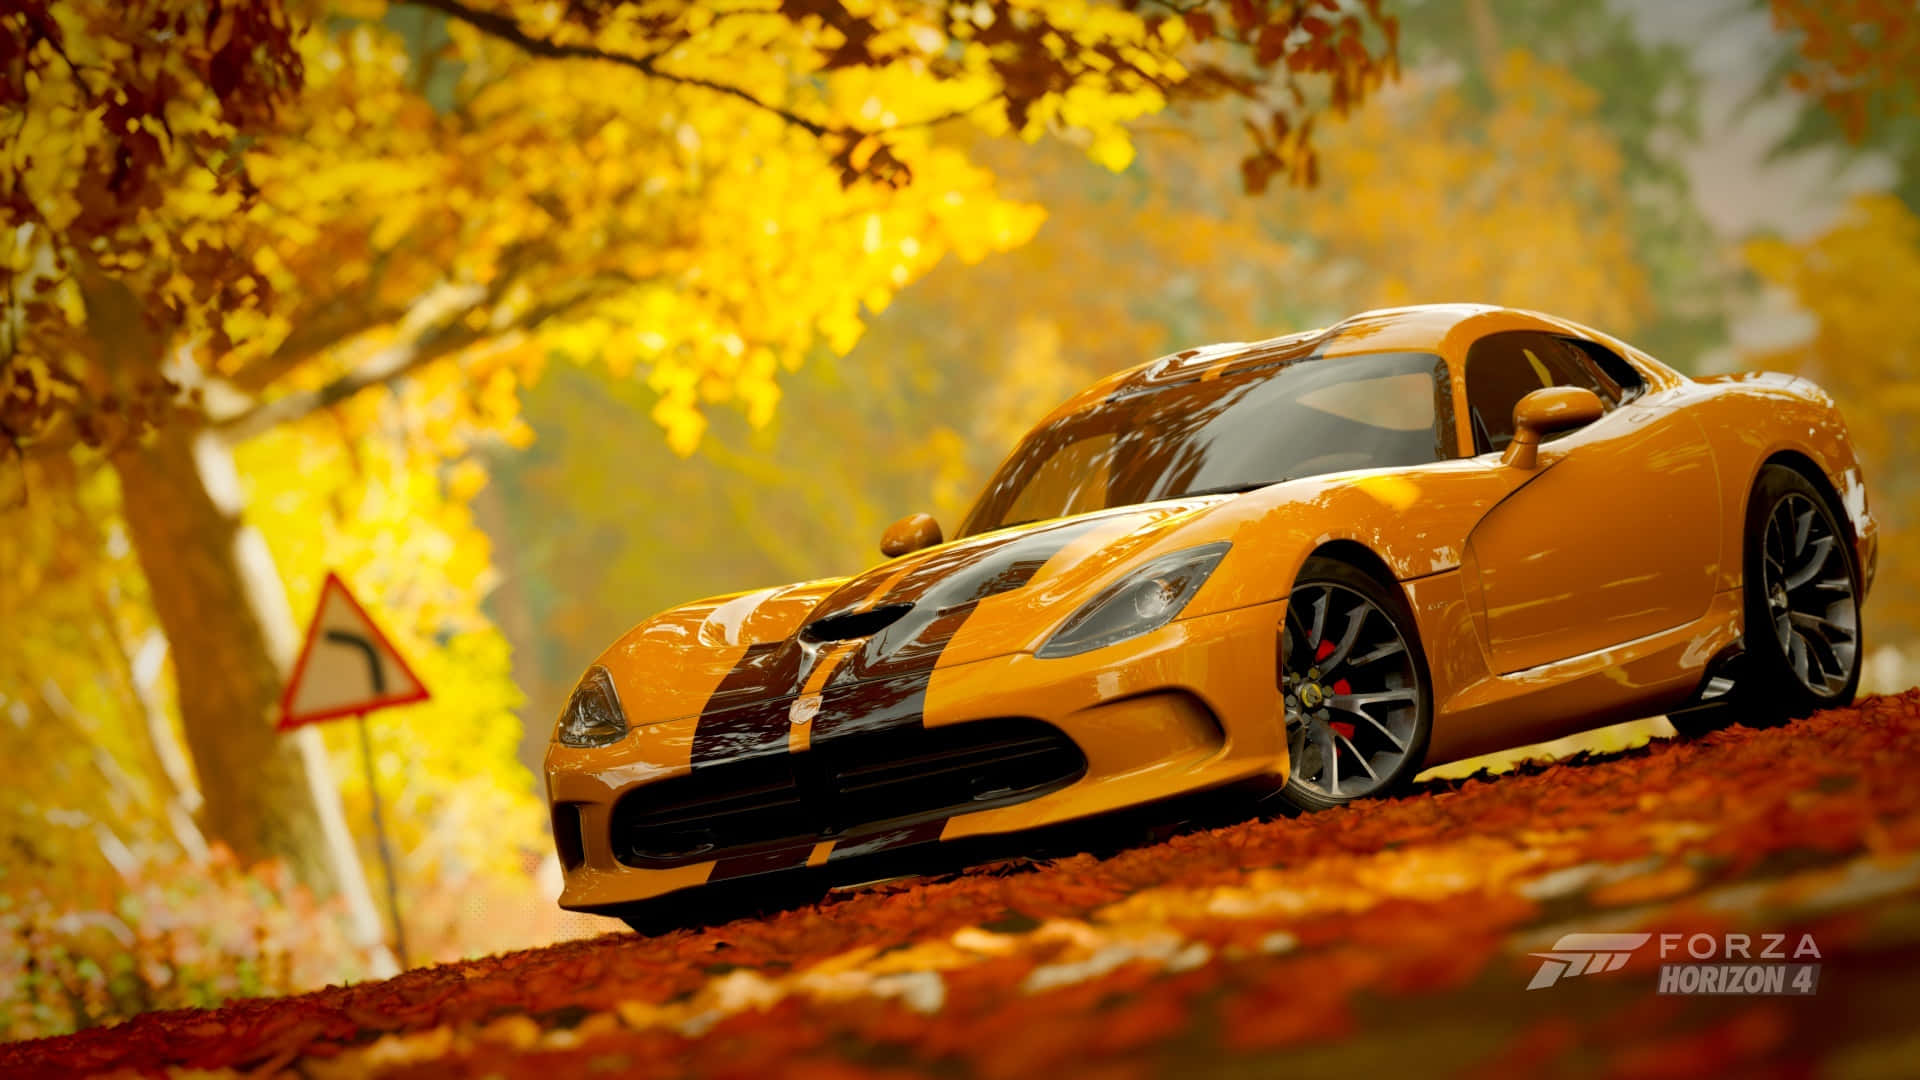 A Yellow Sports Car Driving Down A Road In Autumn